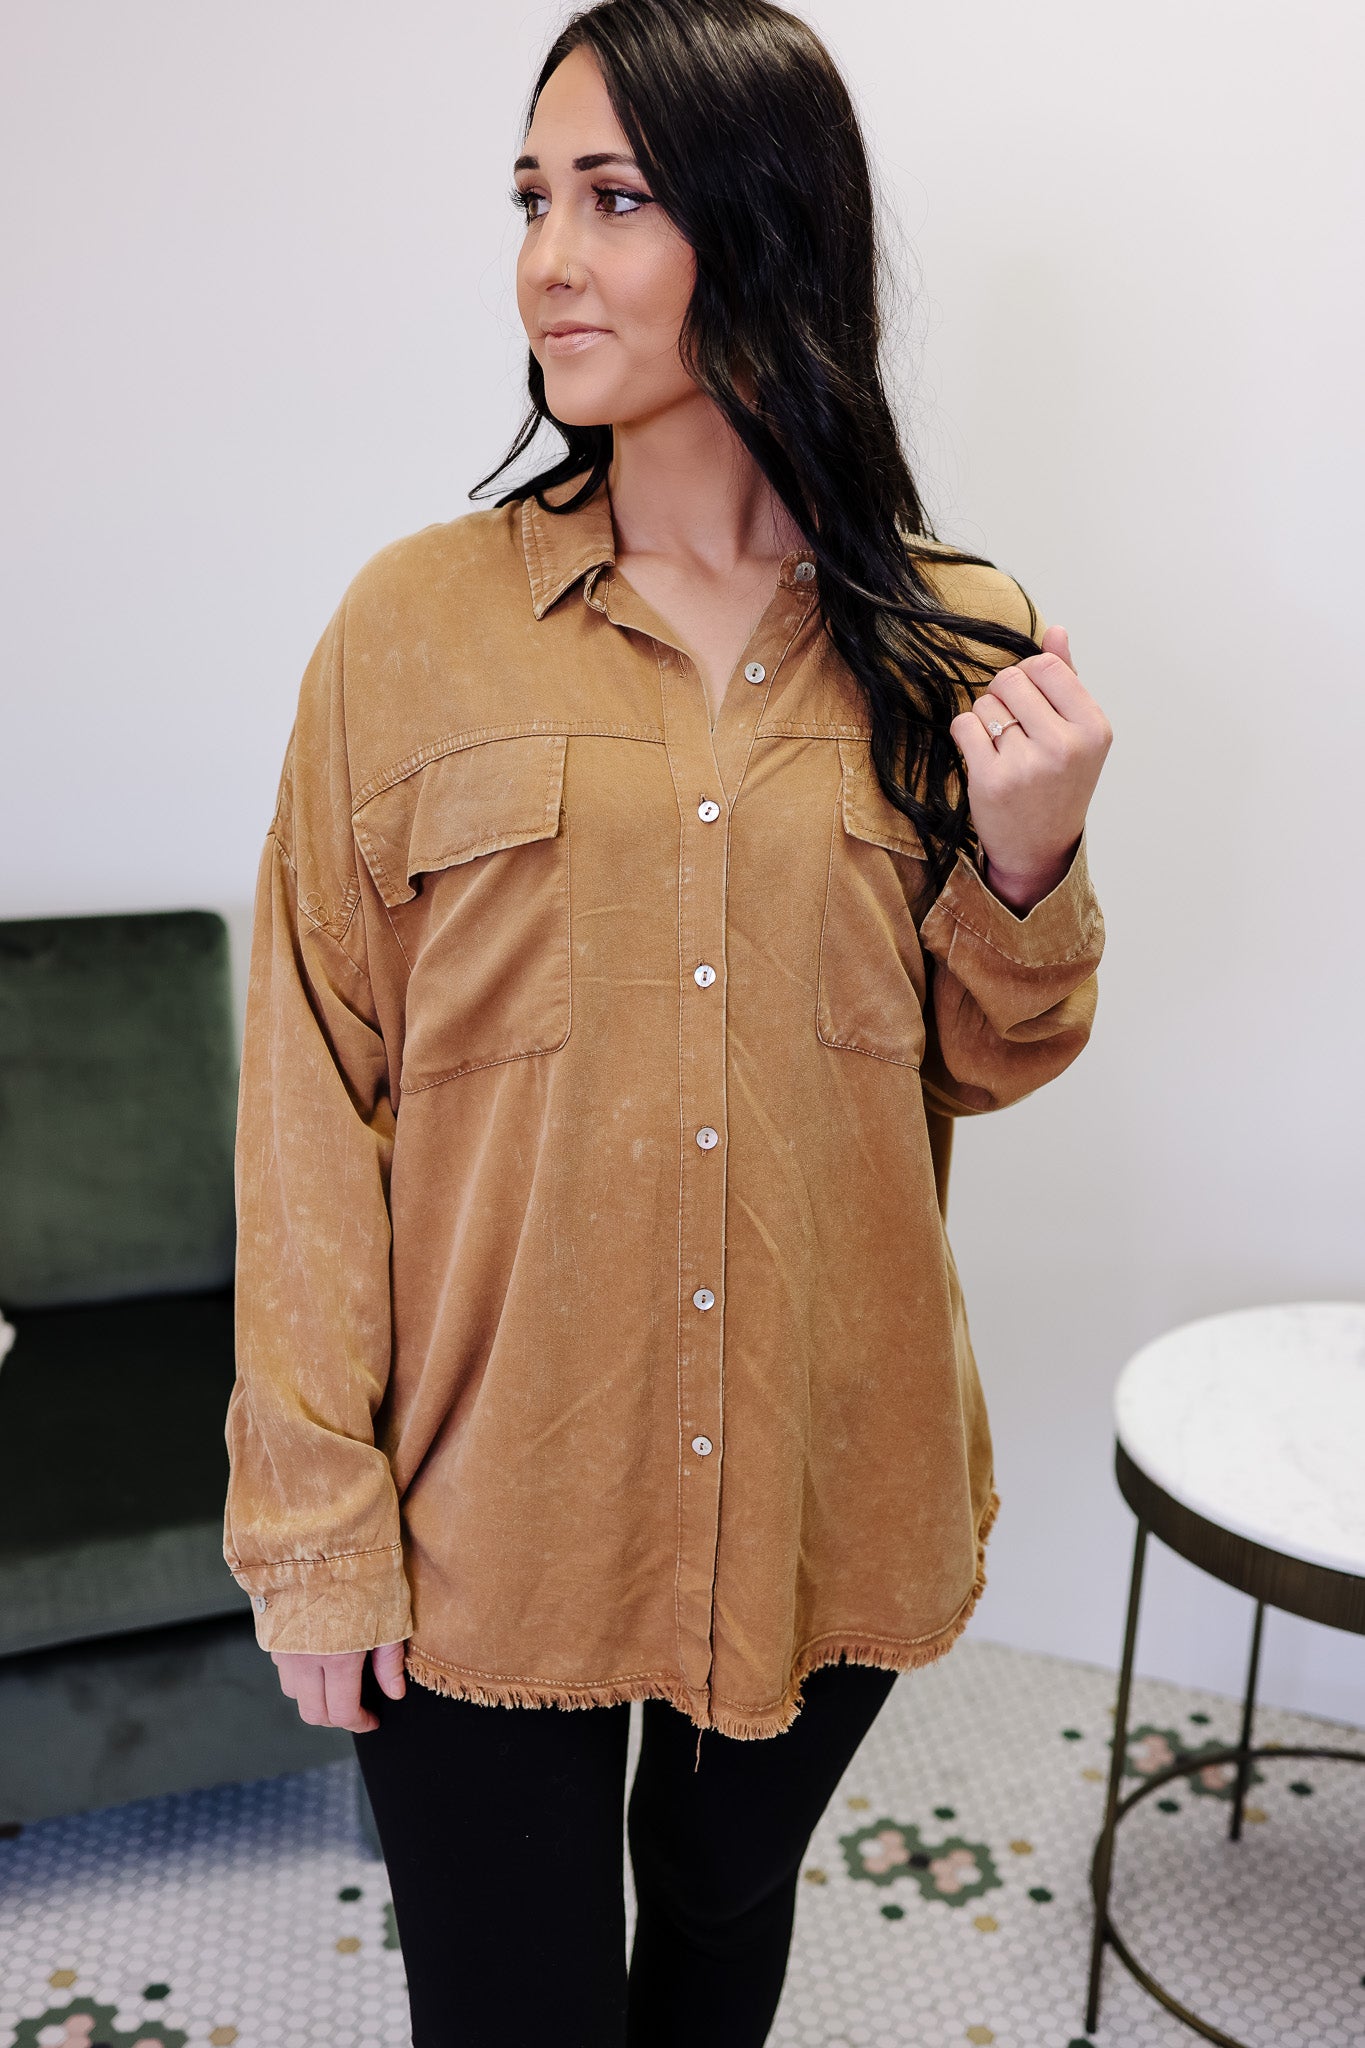 Aria Mineral Wash Fringe Button Down - Camel